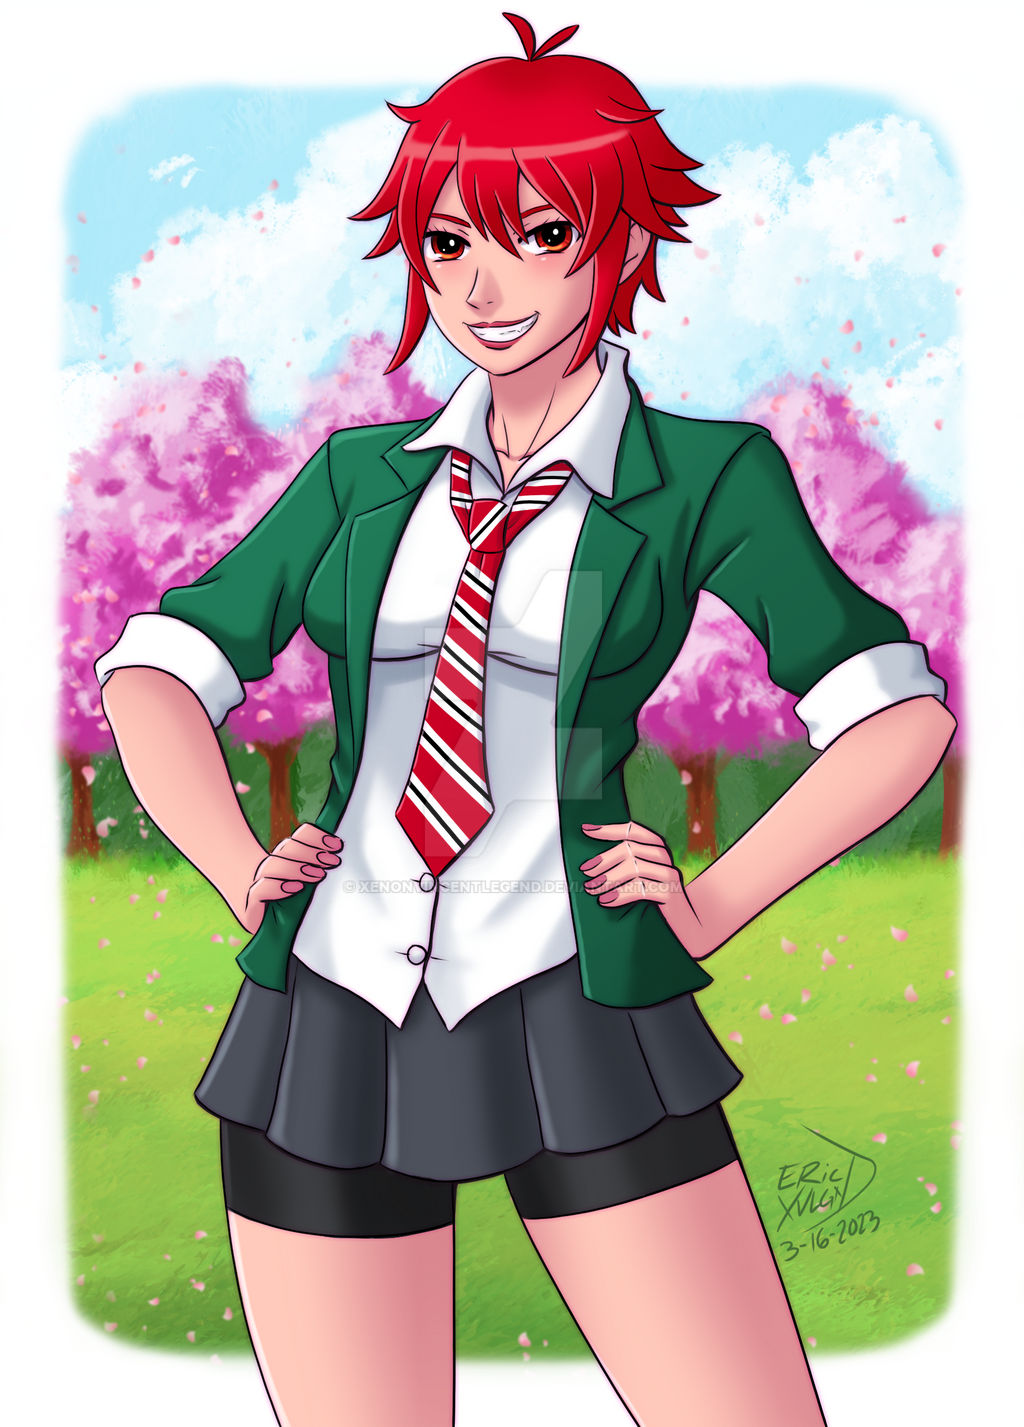 Tomo Aizawa from Tomo-chan Is a Girl! by XenonVincentLegend on DeviantArt